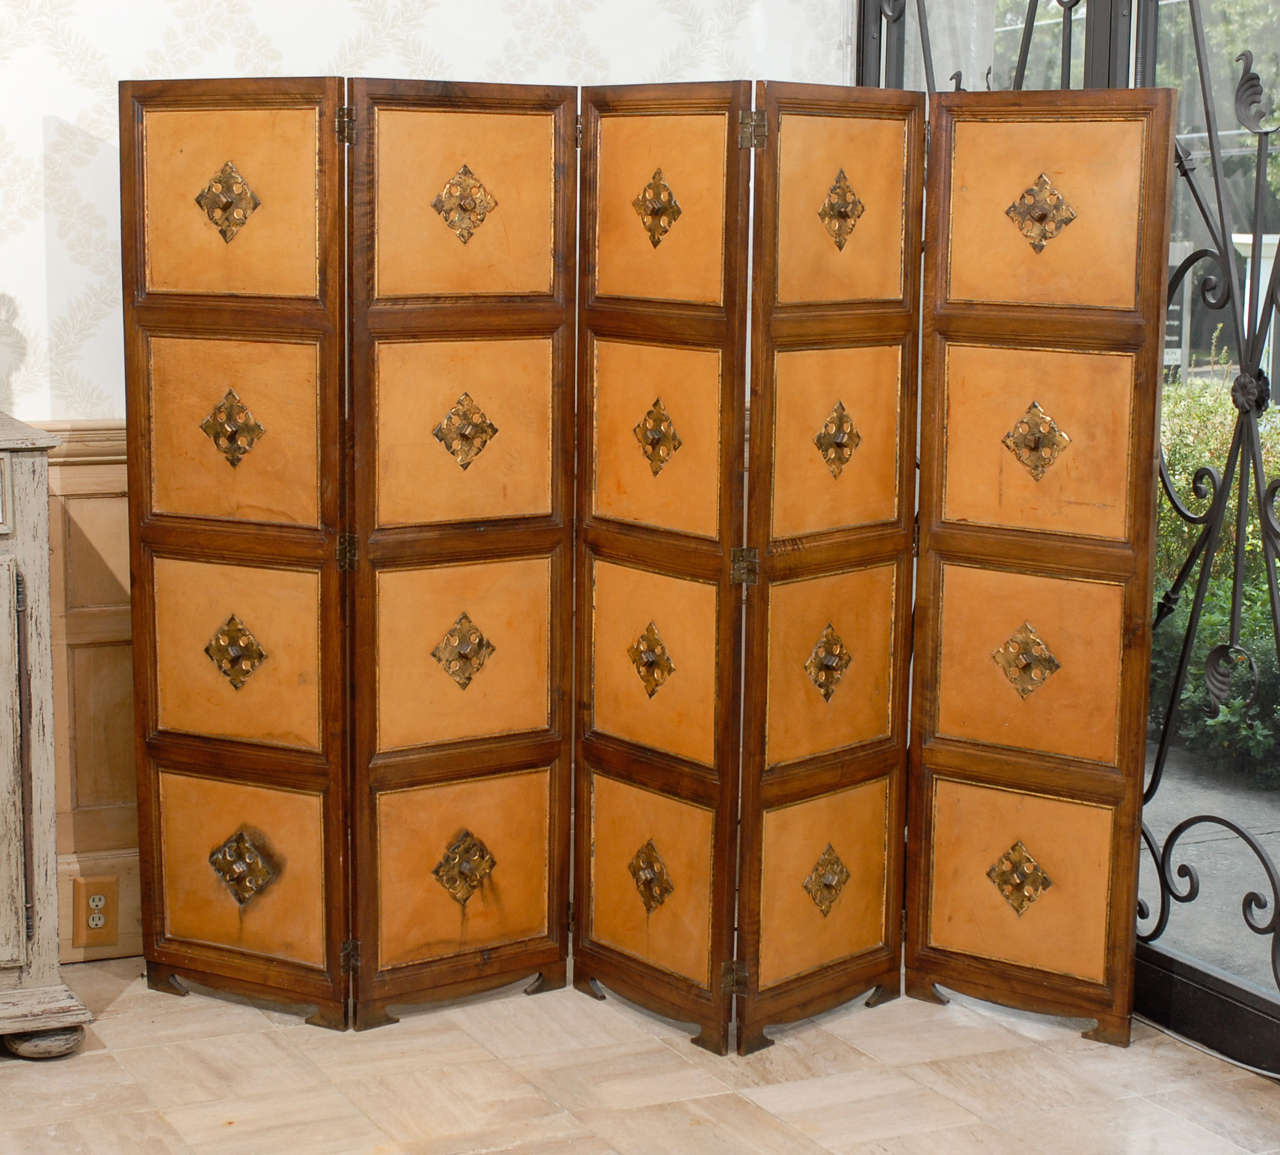 Vintage French Five Panel Folding Screen, Circa 1940
This vintage French screen gives off a more monotone look .  On one side, each leather square has a center medallion, and the other side has solid walnut with a smaller medallion. The five tall